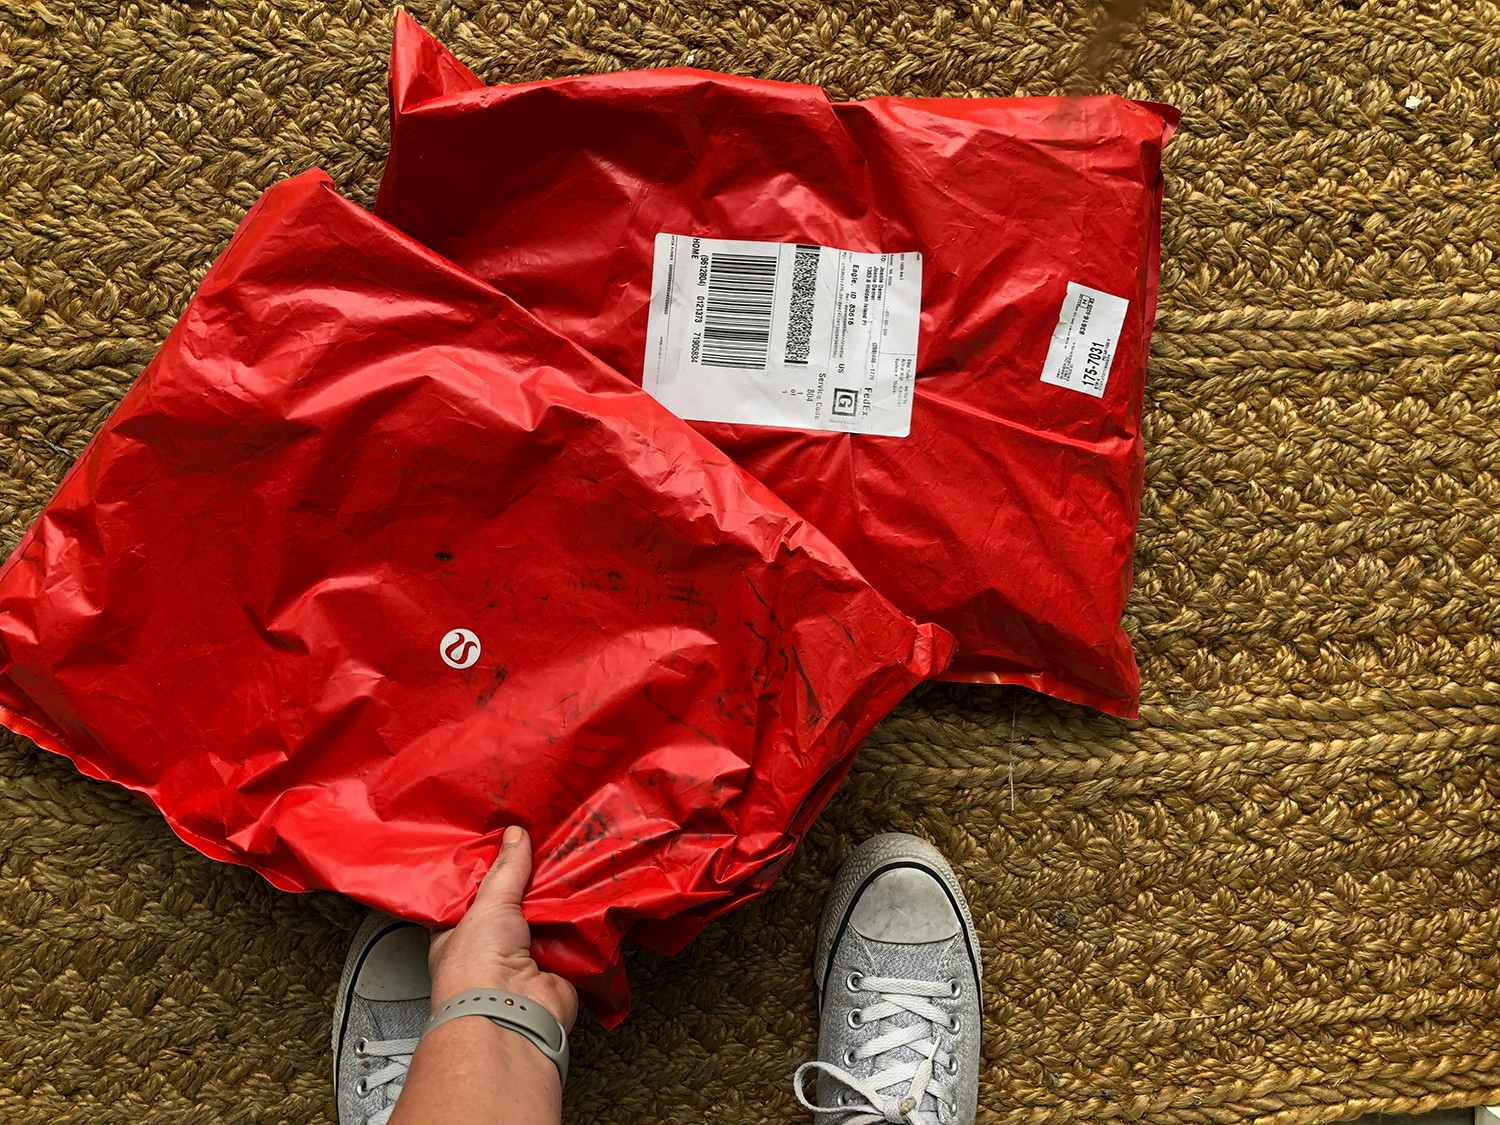 Two Lululemon packages on the floor with a hand reaching down to pick one up